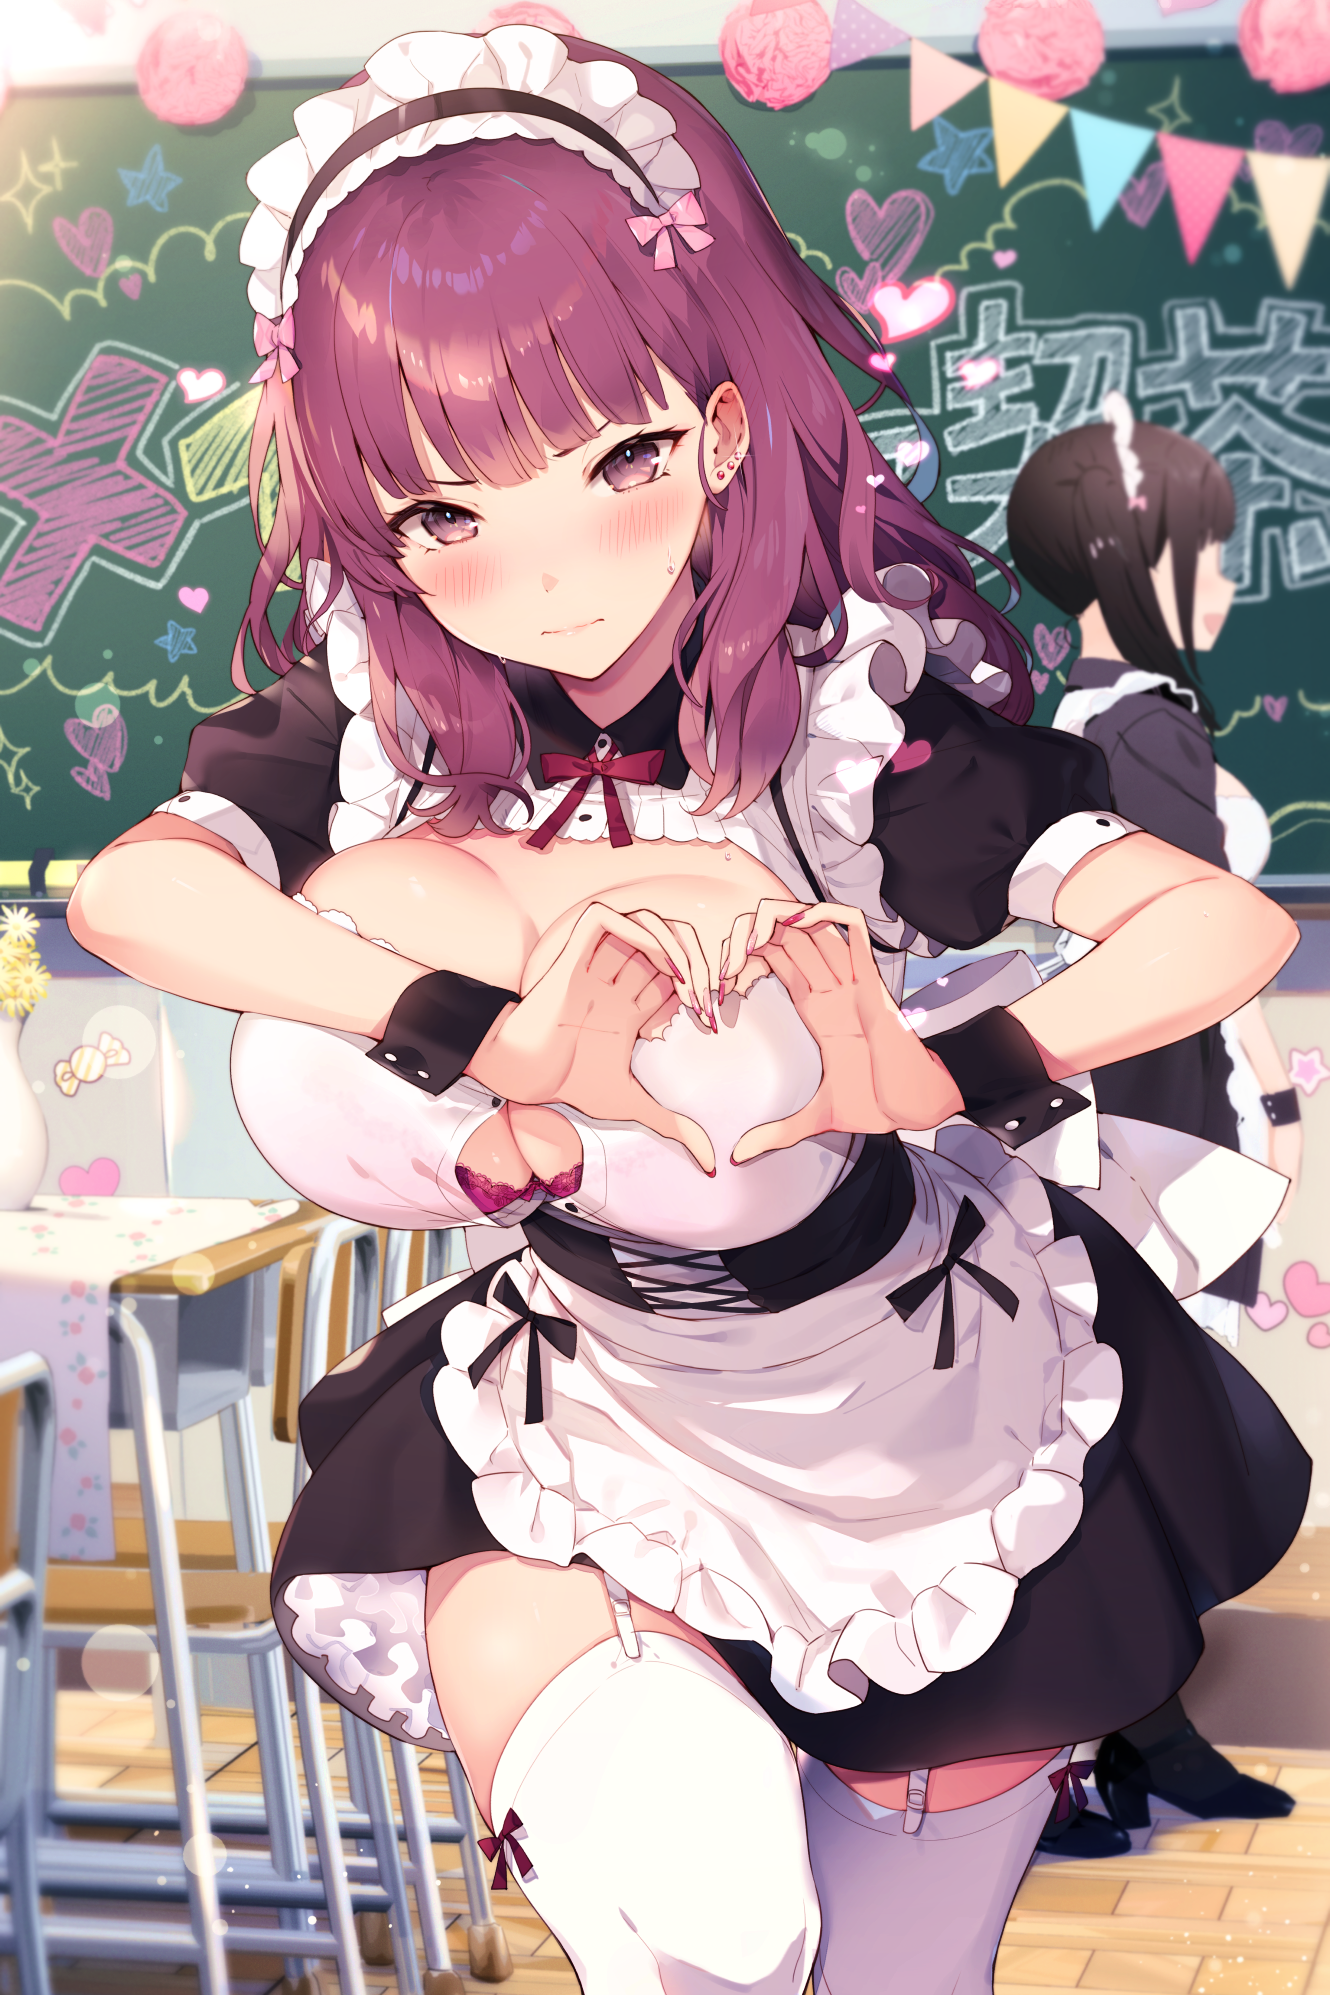 Anime 1330x1995 anime girls anime original characters portrait display looking at viewer bangs blushing maid maid outfit classroom cleavage dress underwear garter straps stockings white stockings 2D artwork drawing digital art Cut (artist) big boobs huge breasts standing thigh-highs headdress wrist cuffs boob heart heart hands